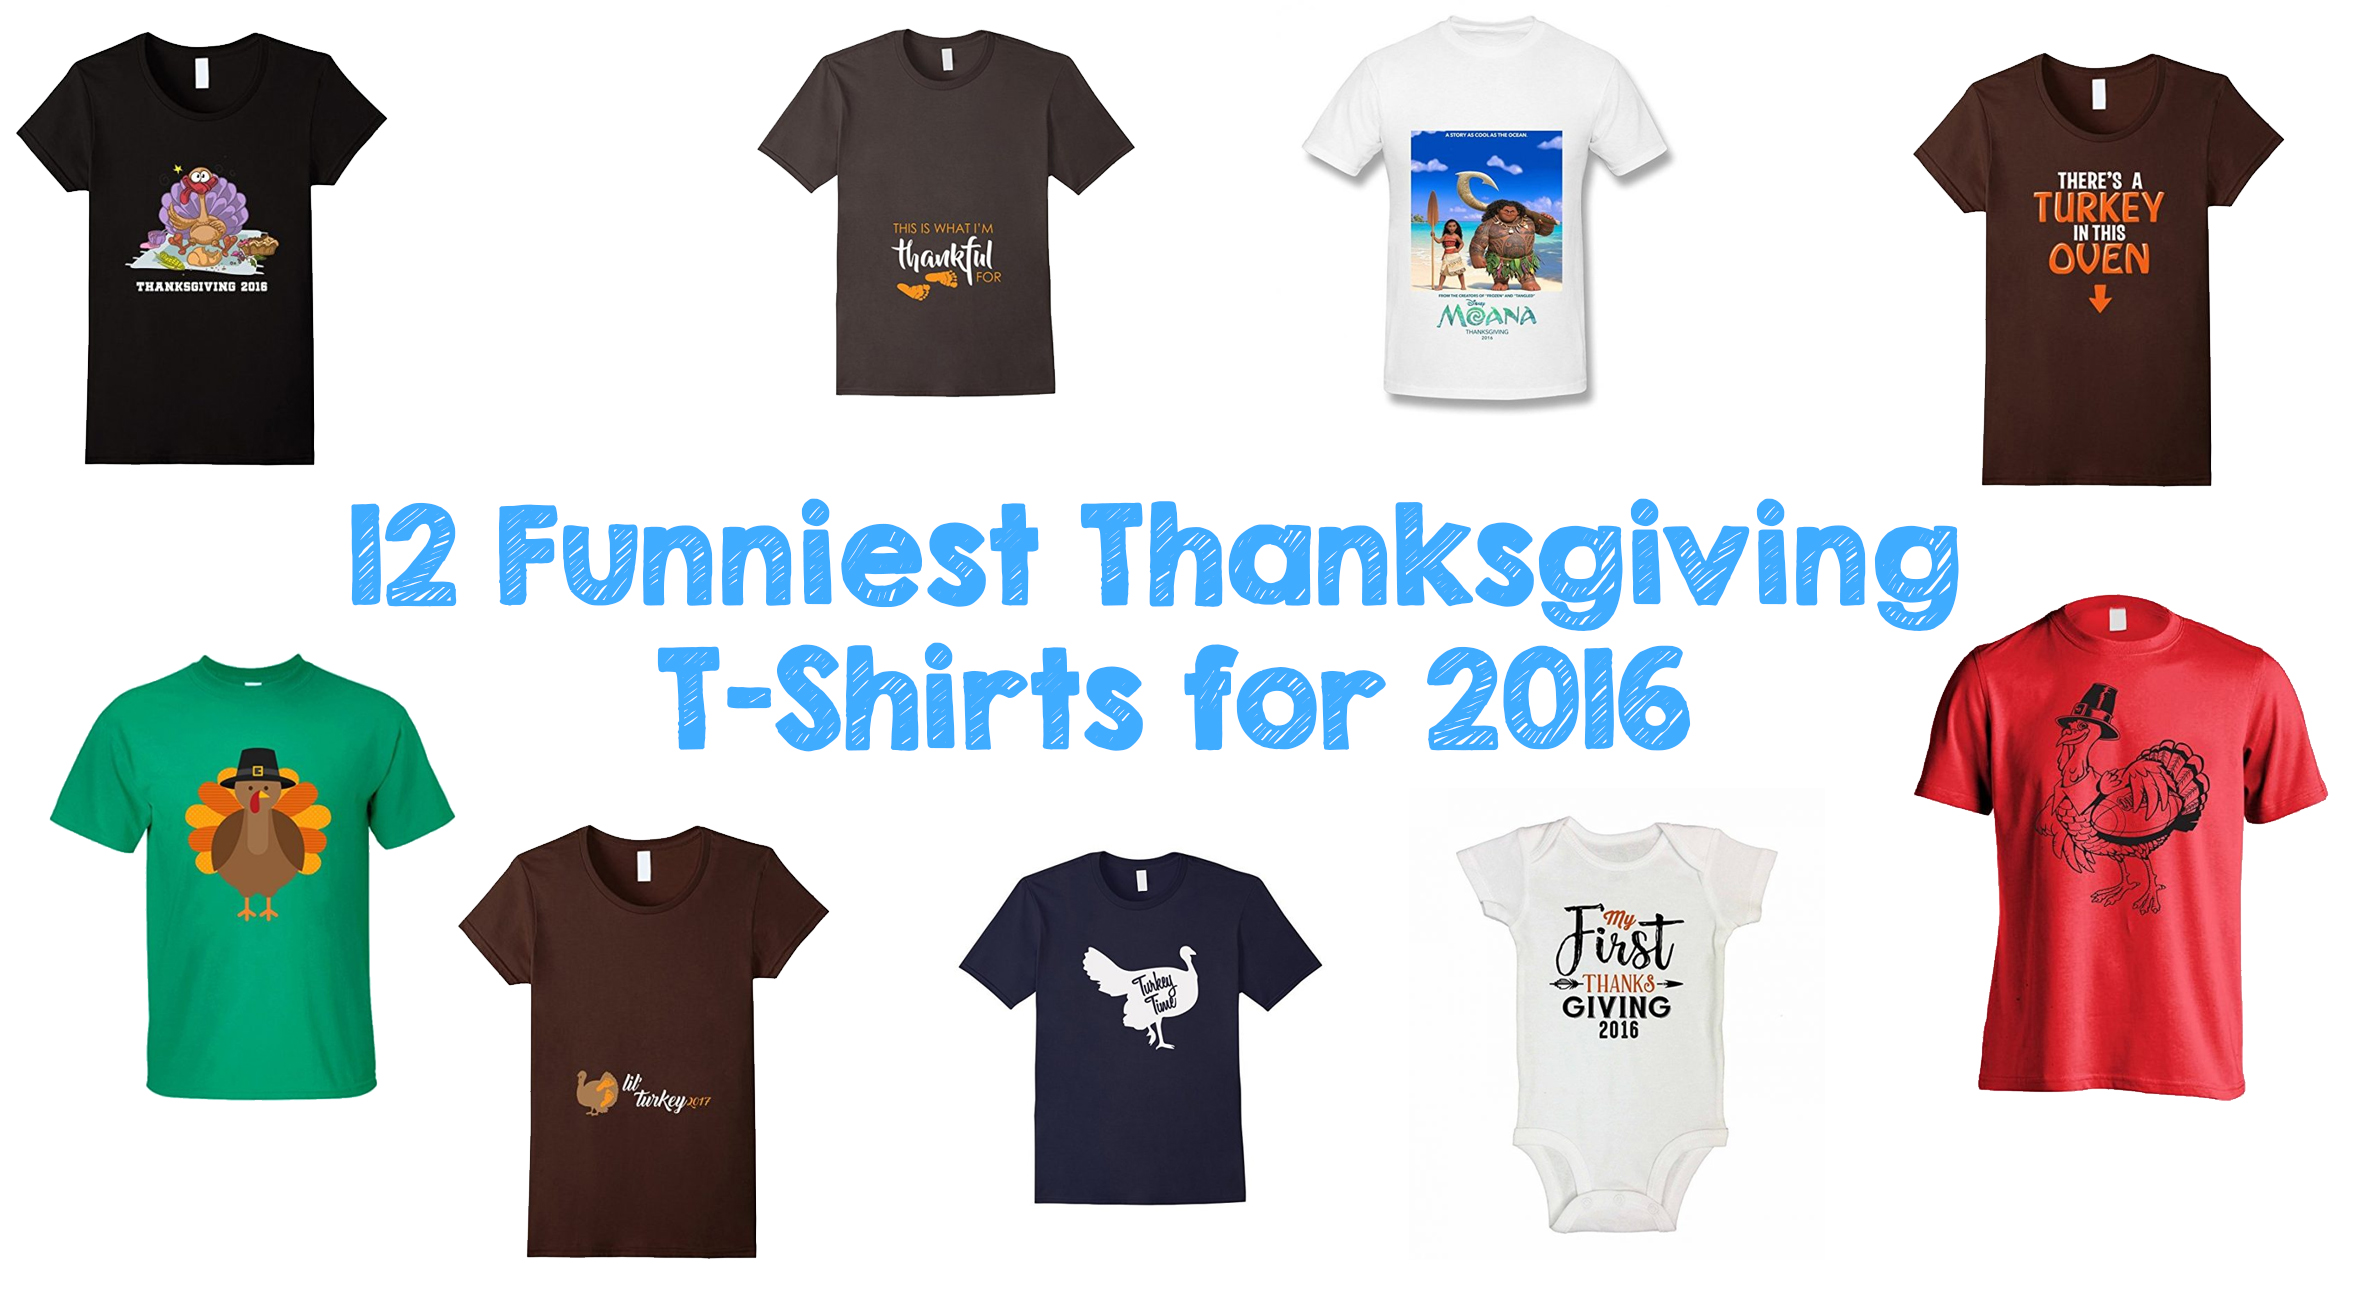 12 Funniest Thanksgiving T-Shirts for 2016